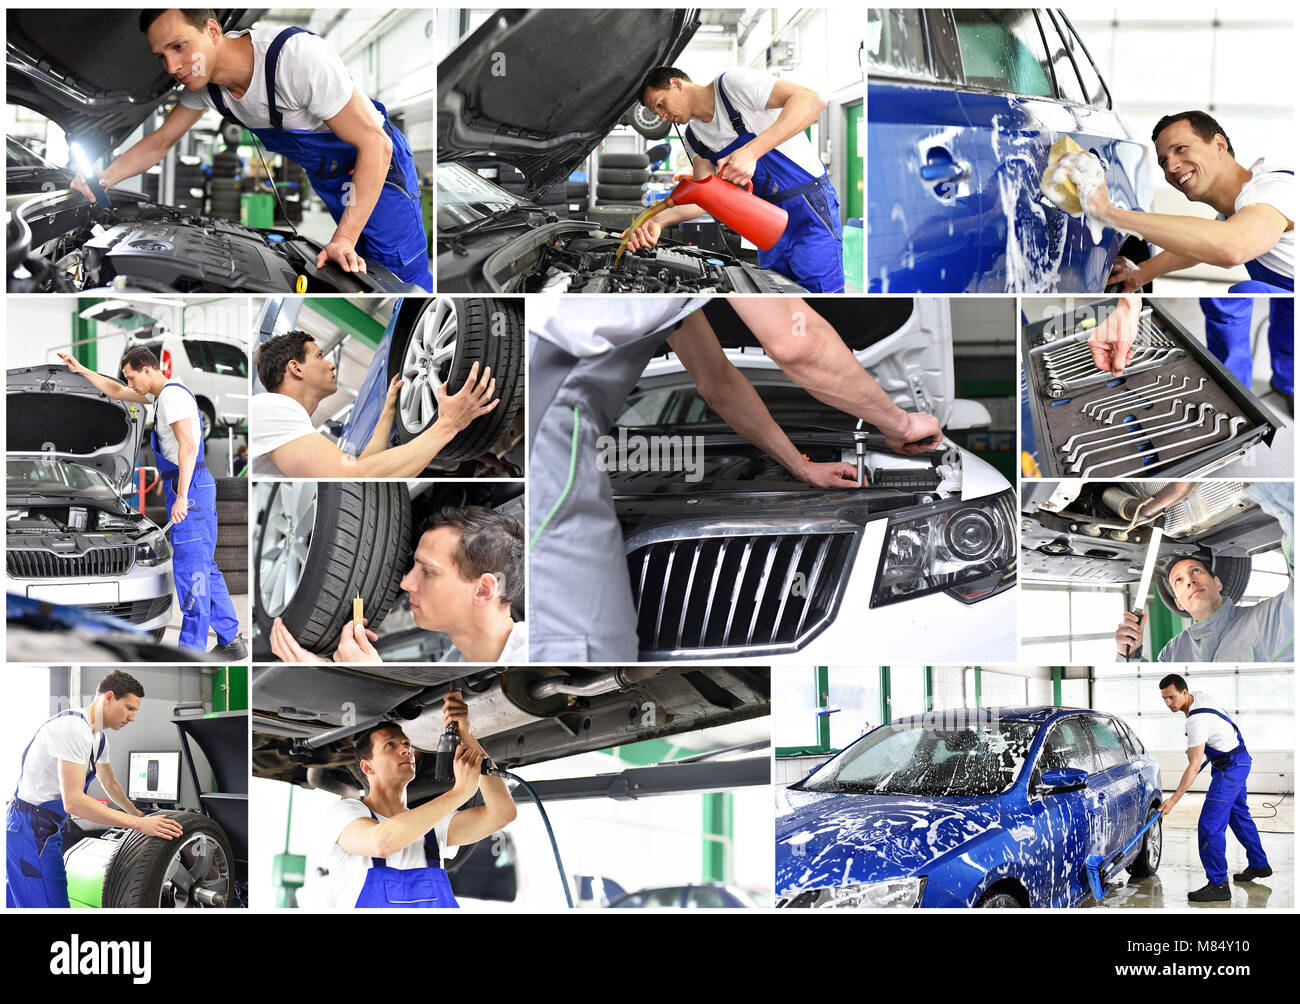 Car repair - mechanic in a workshop - car wash - collage with different motives in the working world Stock Photo